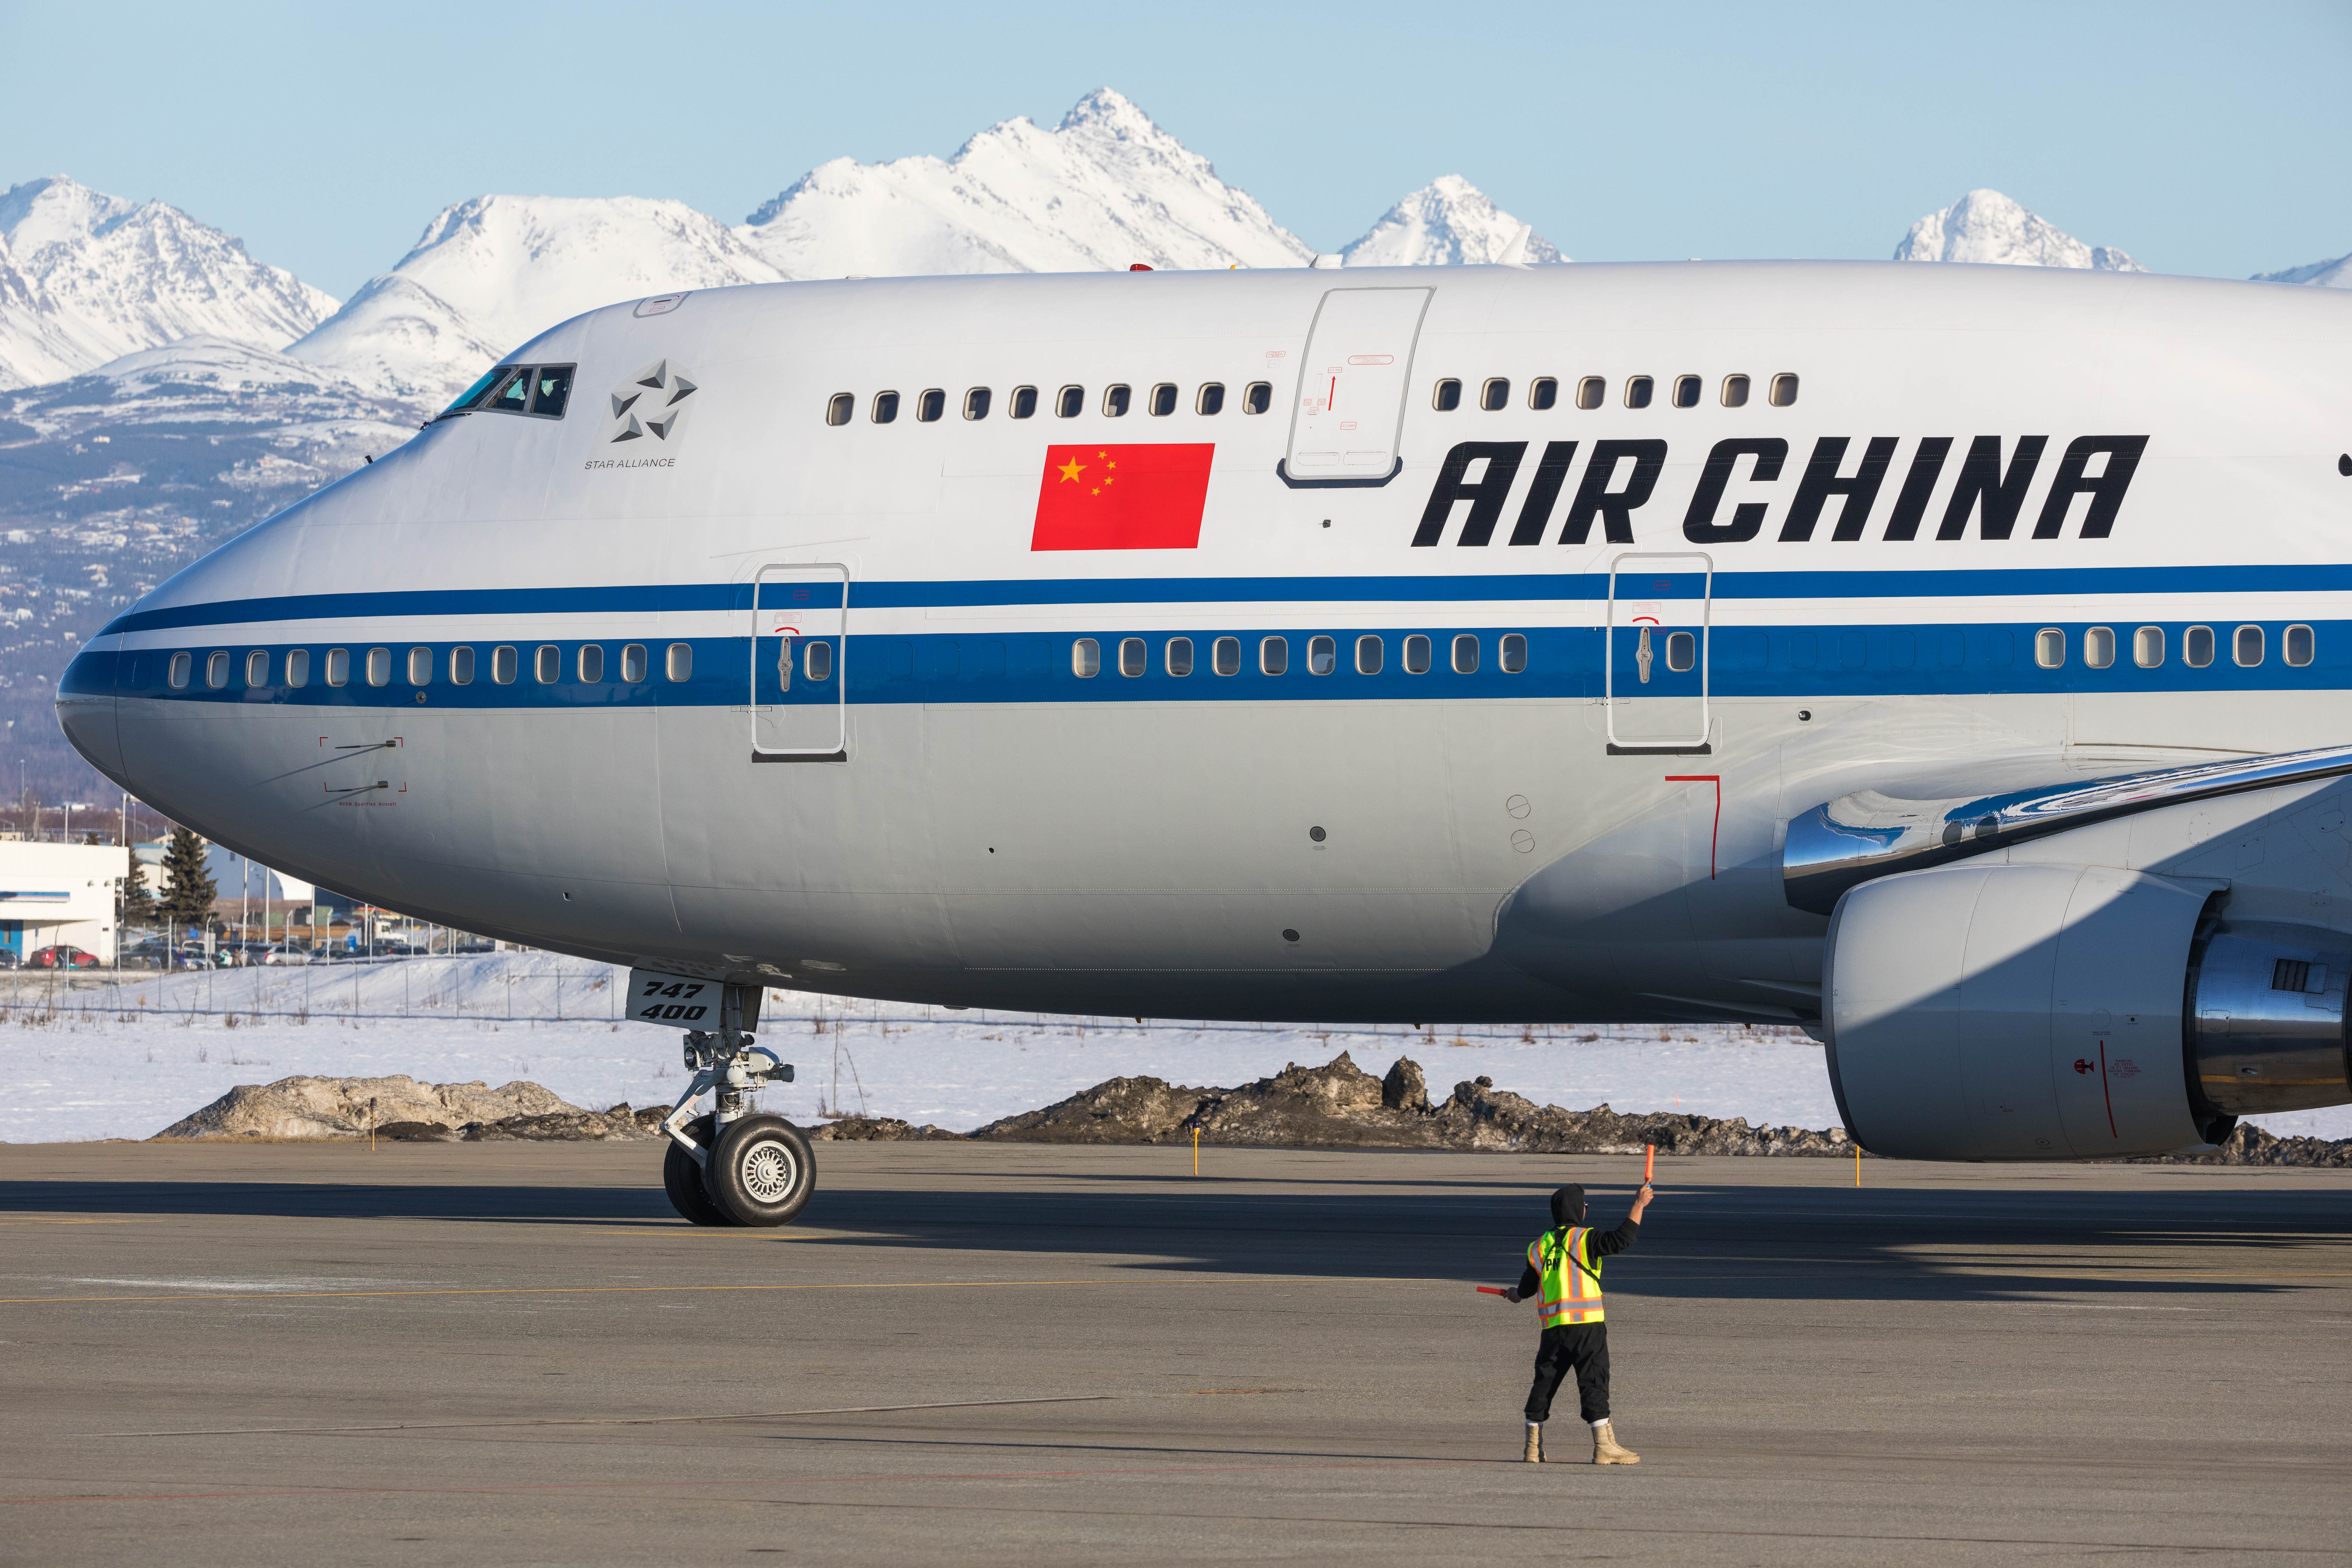 Chinese President Xi Jinping’s plane landed in Anchorage at about 6:45 p.m. Friday, April 7, 2017. He is meeting with Gov. Bill Walker and others on his way back to China. (Loren Holmes / Alaska Dispatch News)